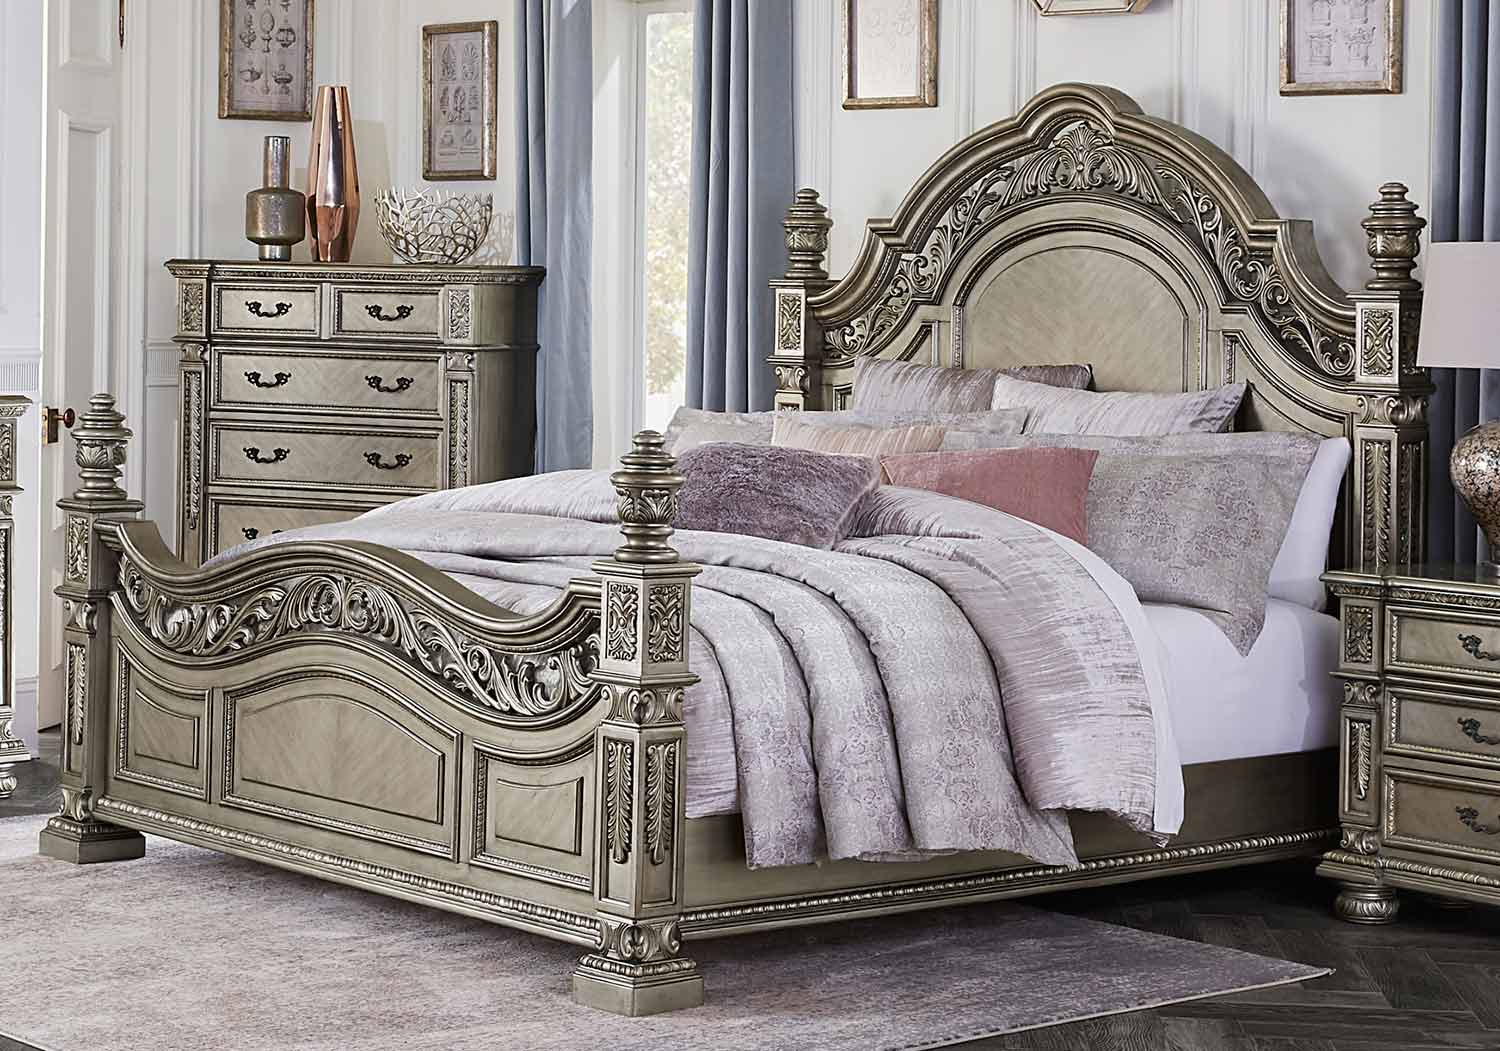 Homelegance Catalonia Bed - Traditional Platinum Gold Finish with Cherry Veneer